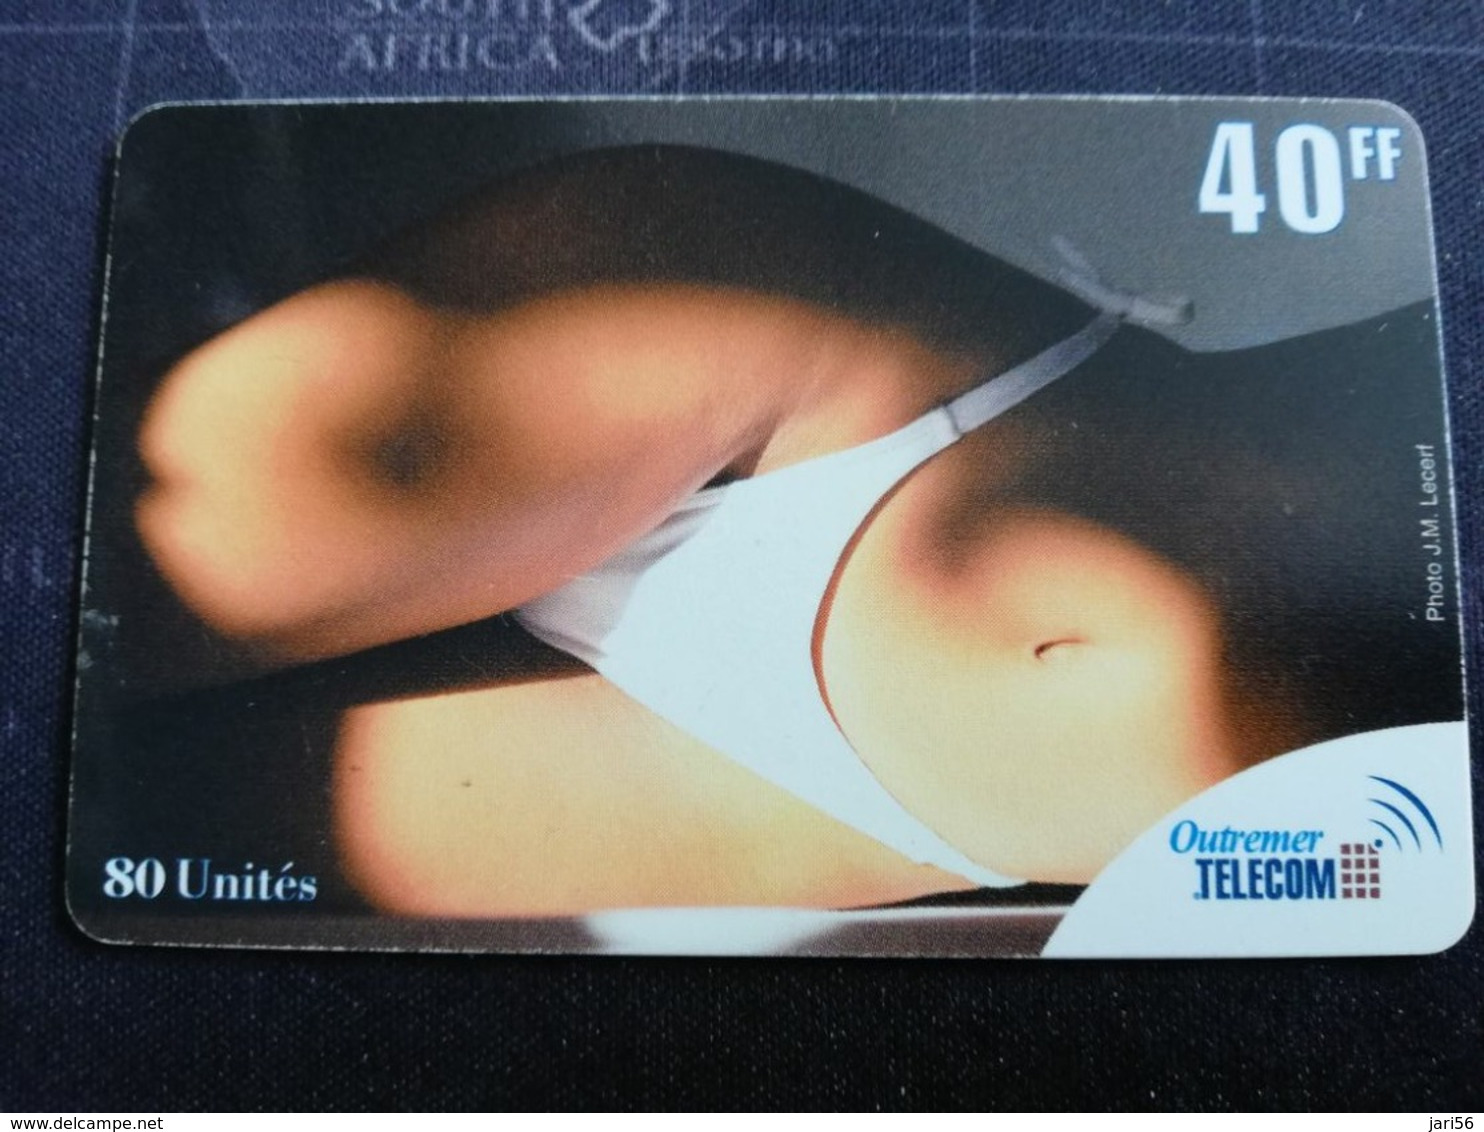 Caribbean Phonecard St Martin French  40 UNITS NICE  LADY IN BIKINI  OUTREMER TELECOM     **3033 ** - Antillen (Frans)